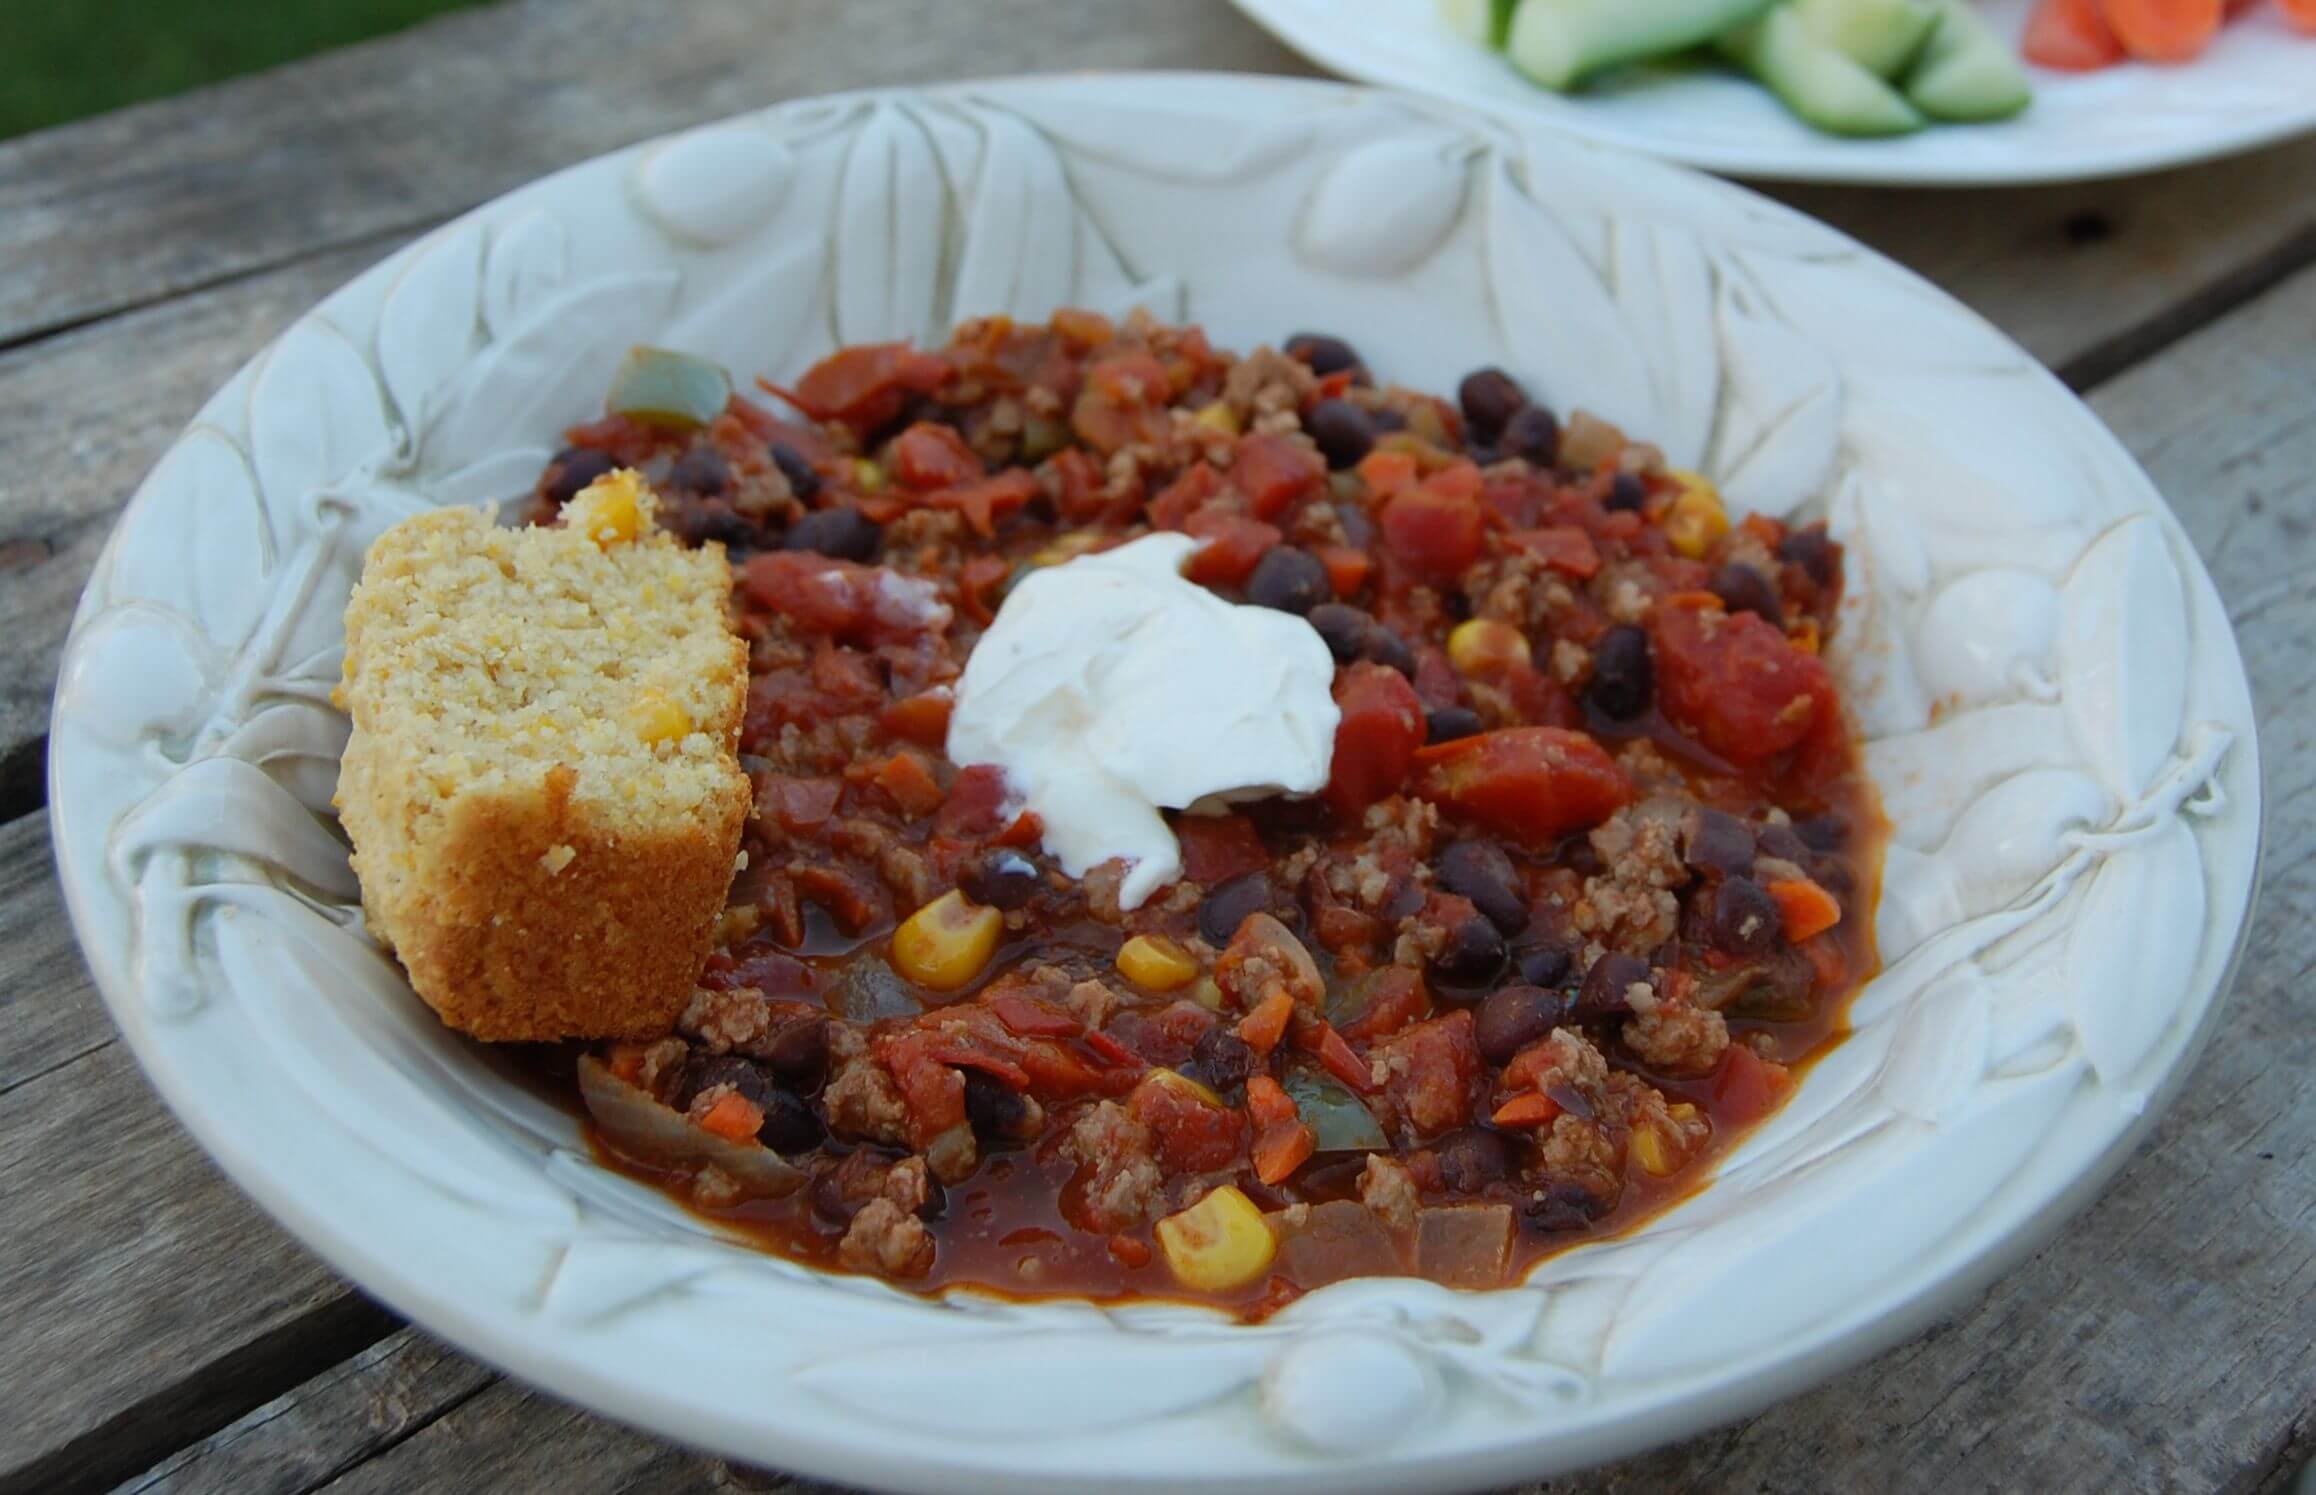 Homemade chili in a bowl with a side of cornbread. 